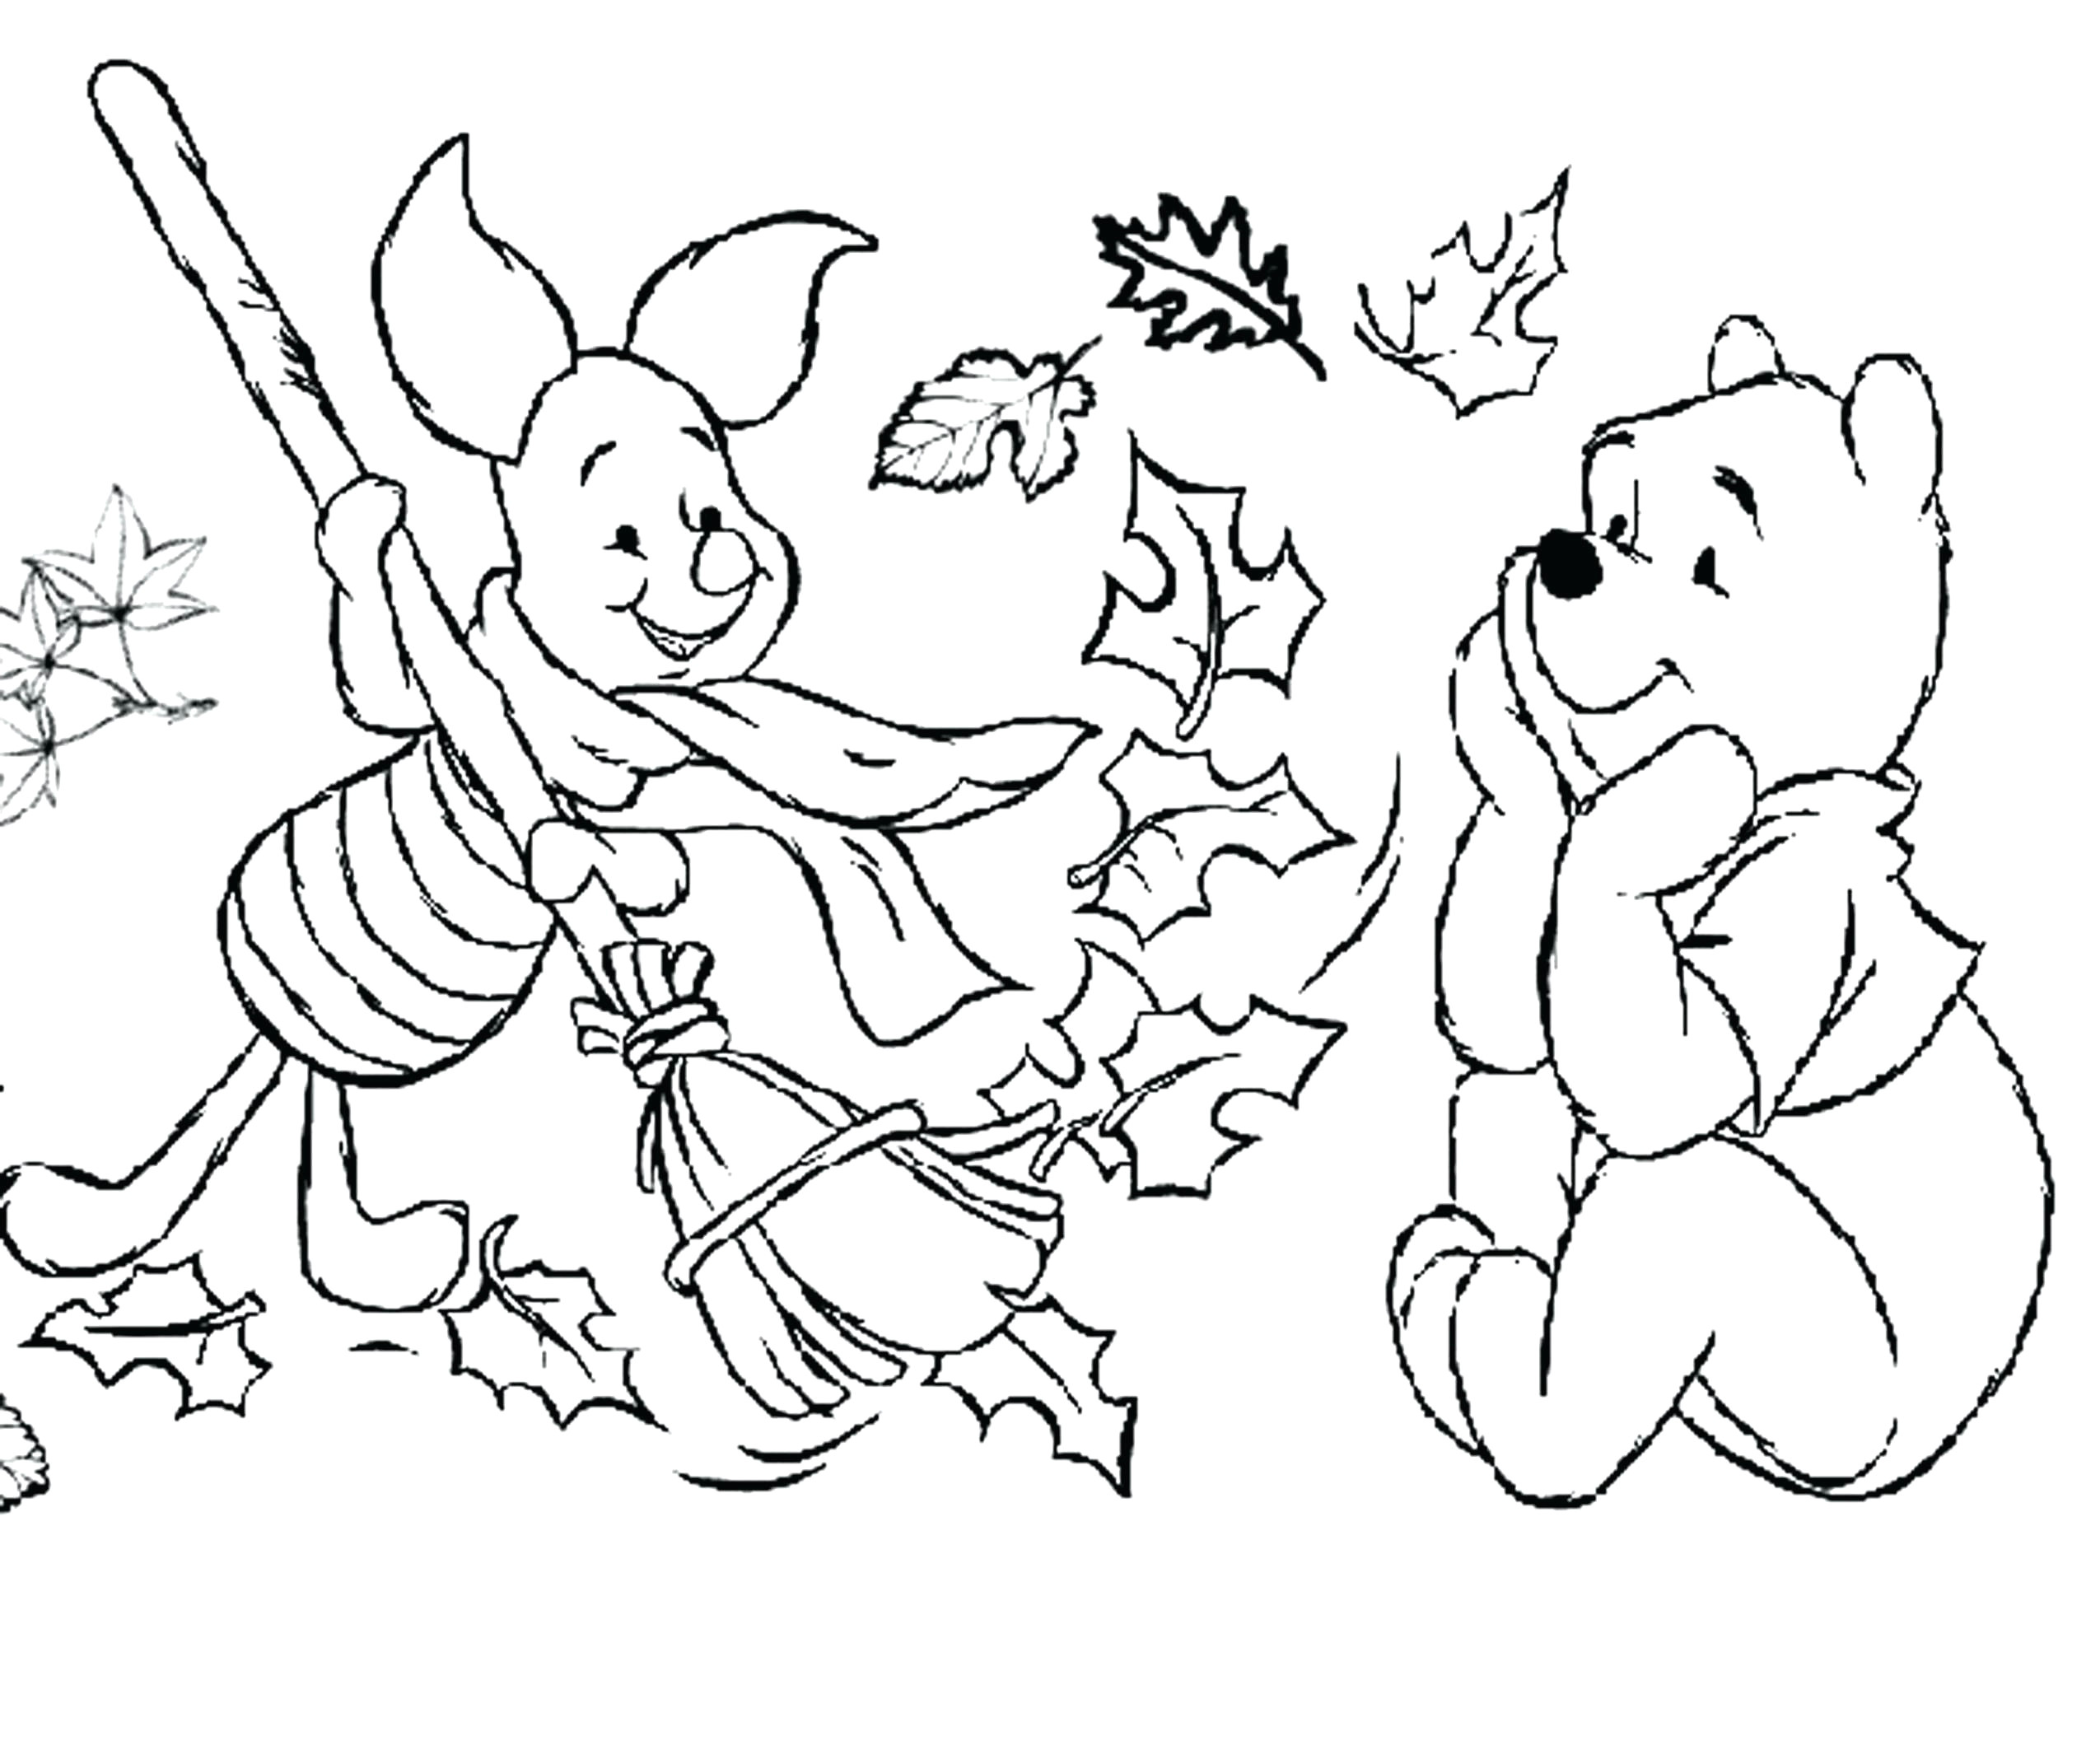 Easy Drawings In Color Easy to Draw Instruments Home Coloring Pages Best Color Sheet 0d